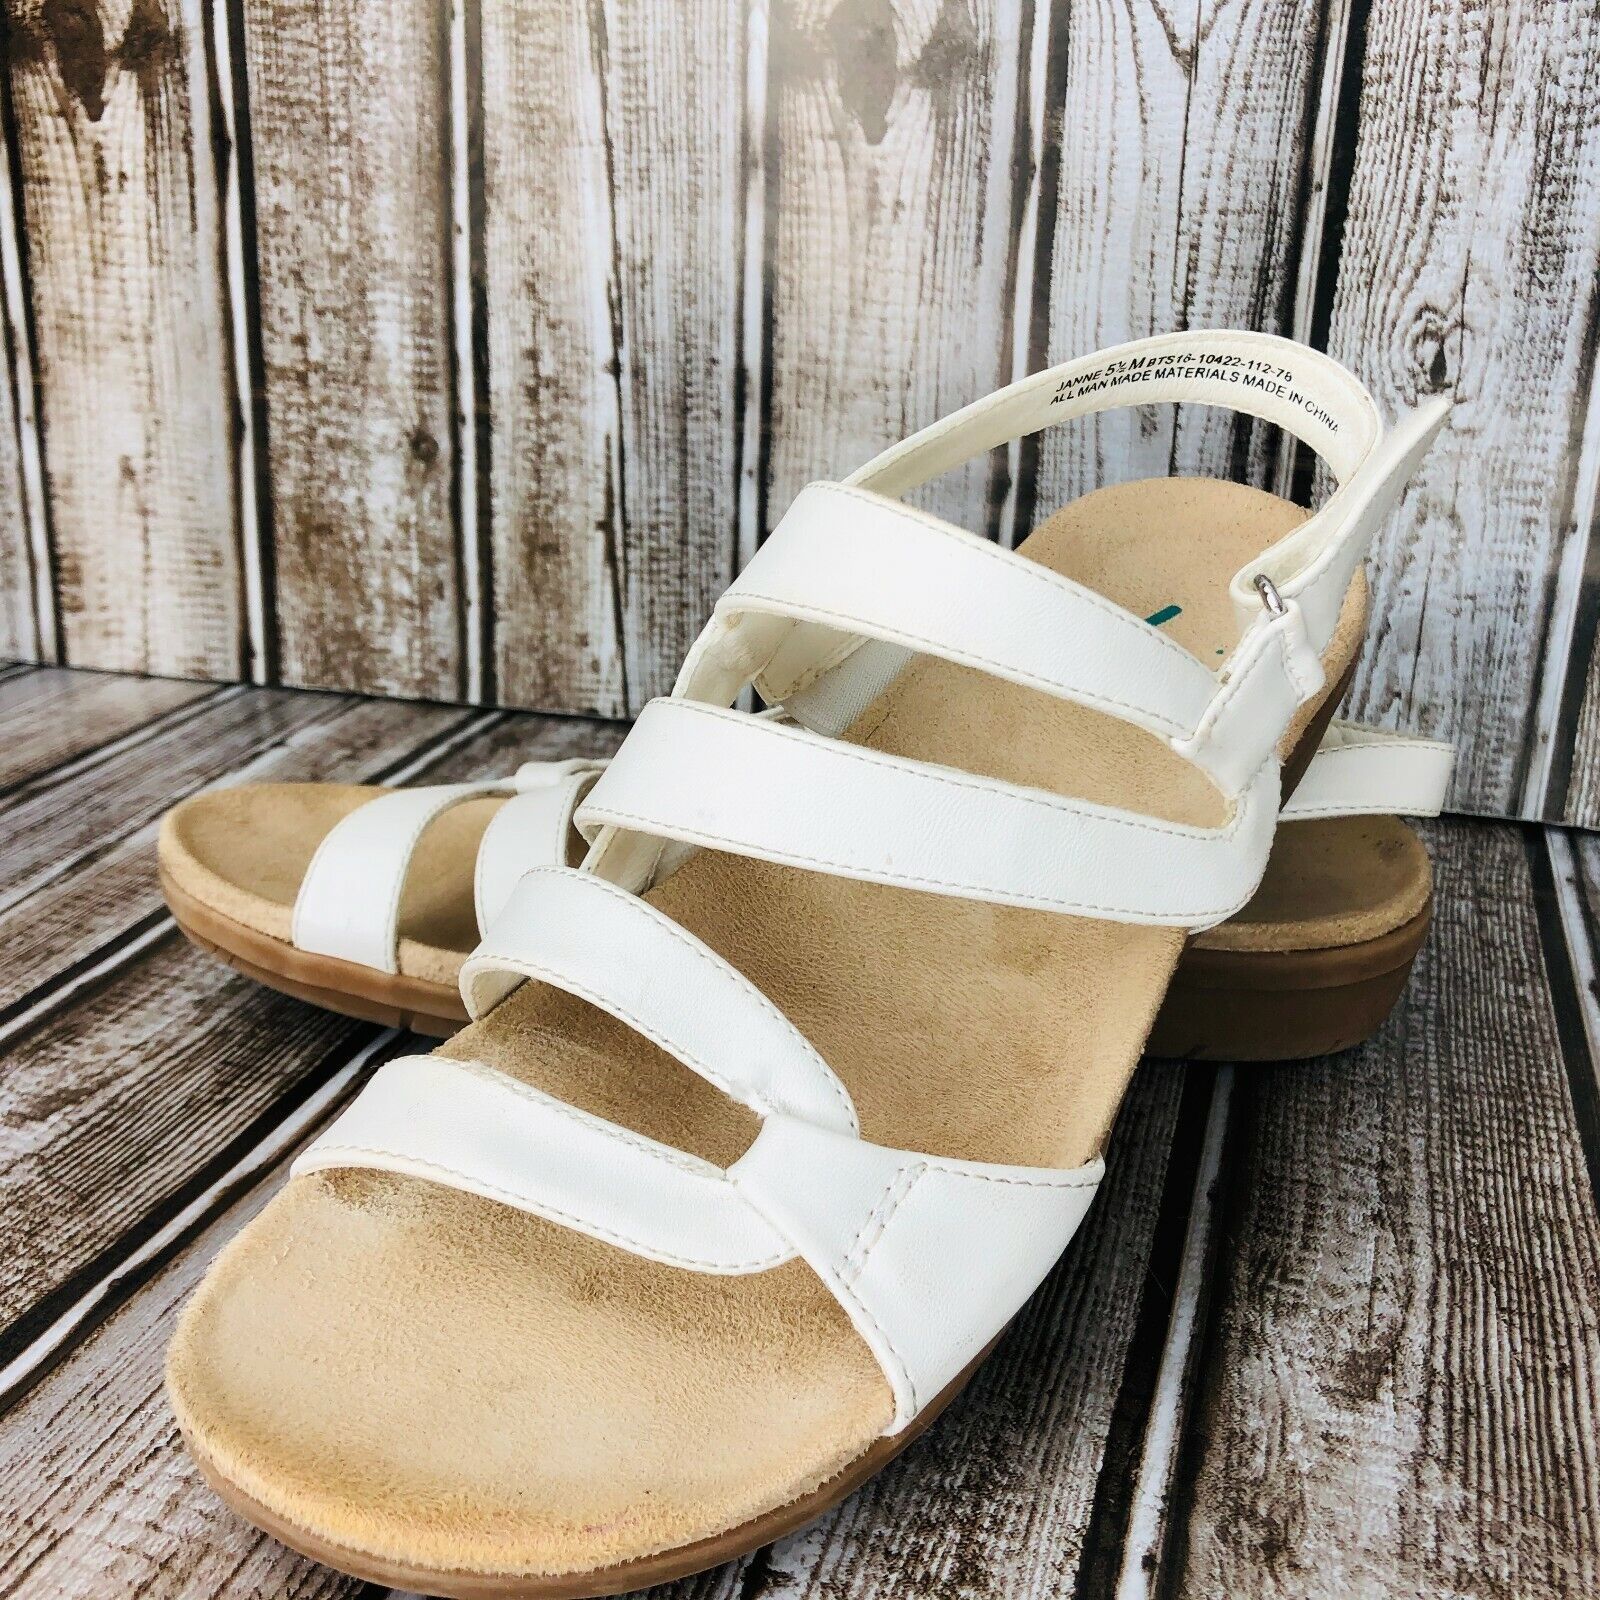 Primary image for Yuu Janne White Slingback Sandals Size 5.5 M Strap Flats Hook Loop Shoe 